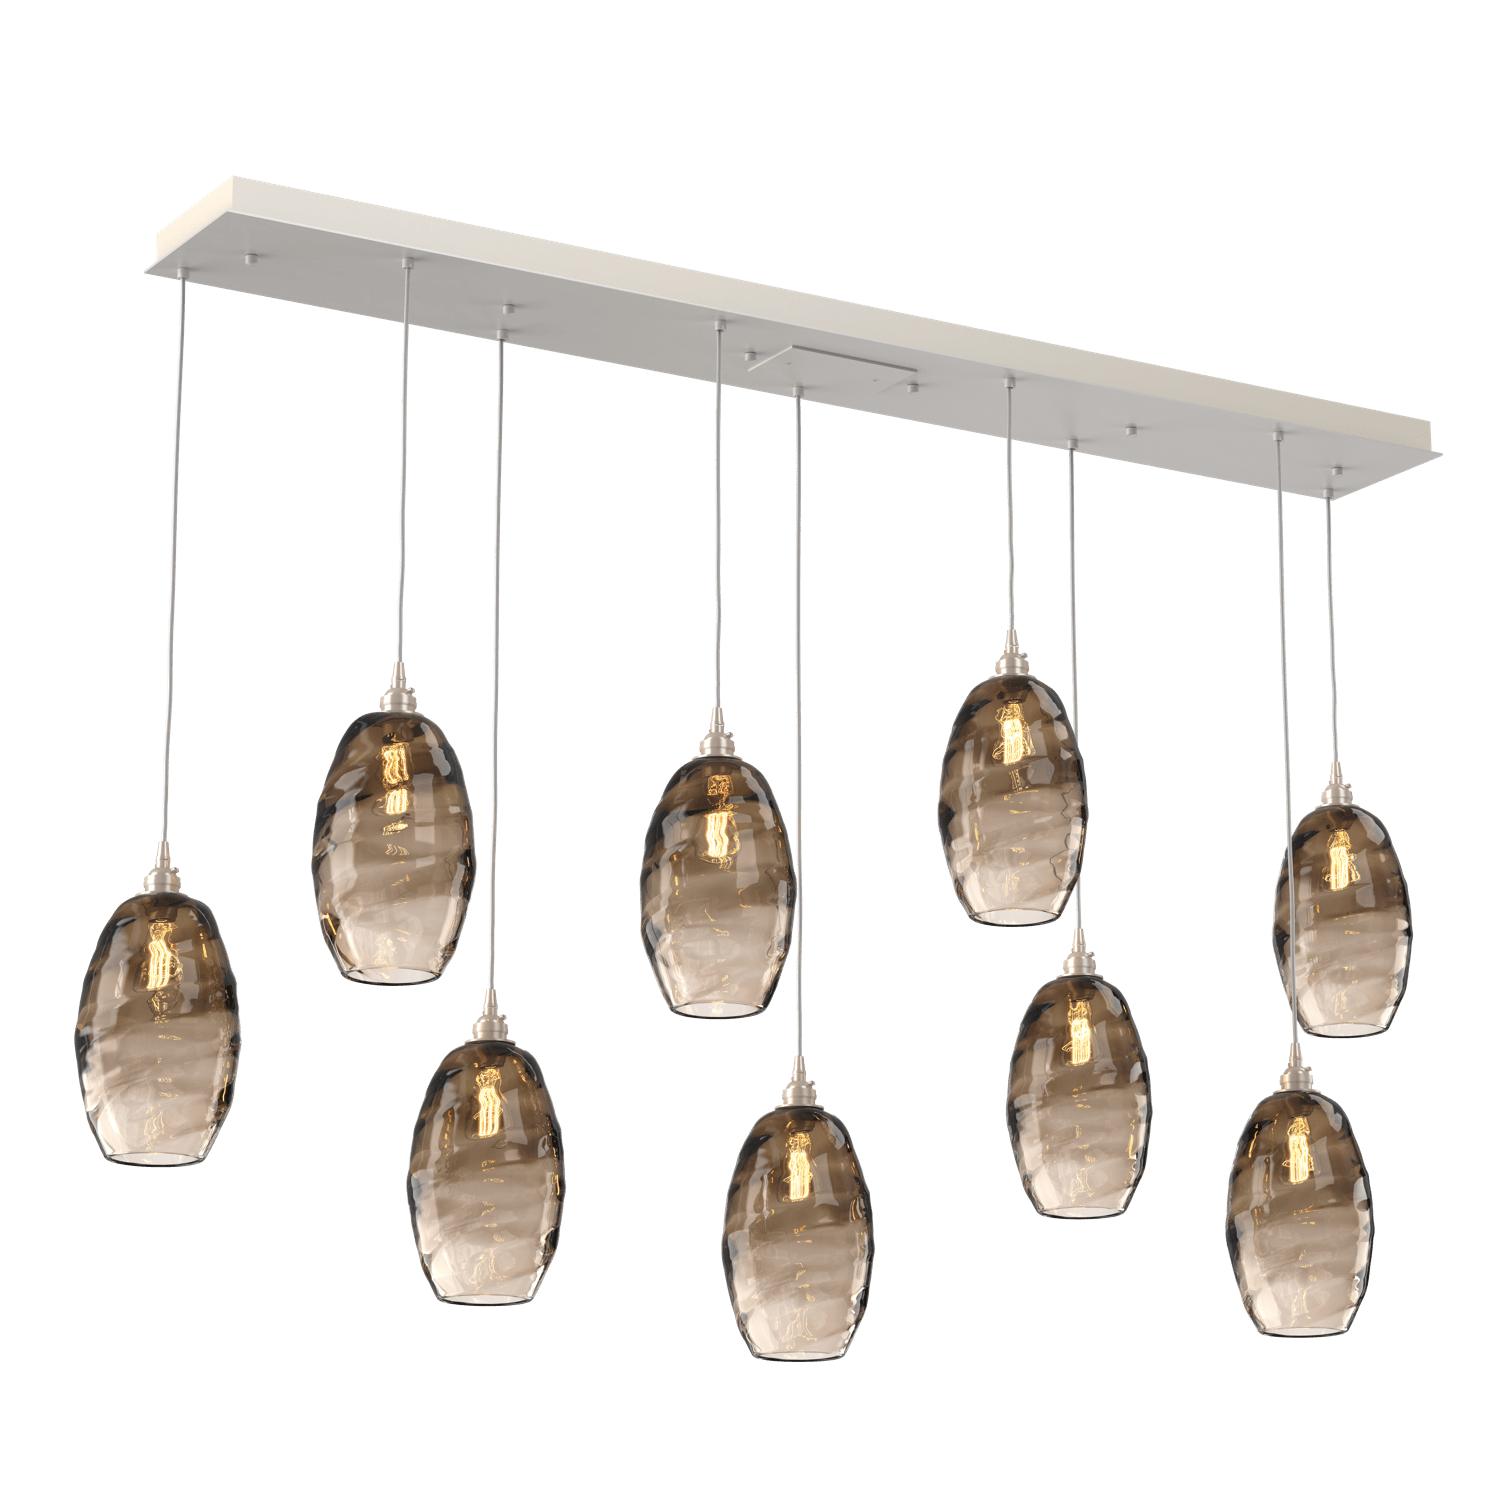 PLB0035-09-BS-OB-Hammerton-Studio-Optic-Blown-Glass-Elisse-9-light-linear-pendant-chandelier-with-metallic-beige-silver-finish-and-optic-bronze-blown-glass-shades-and-incandescent-lamping